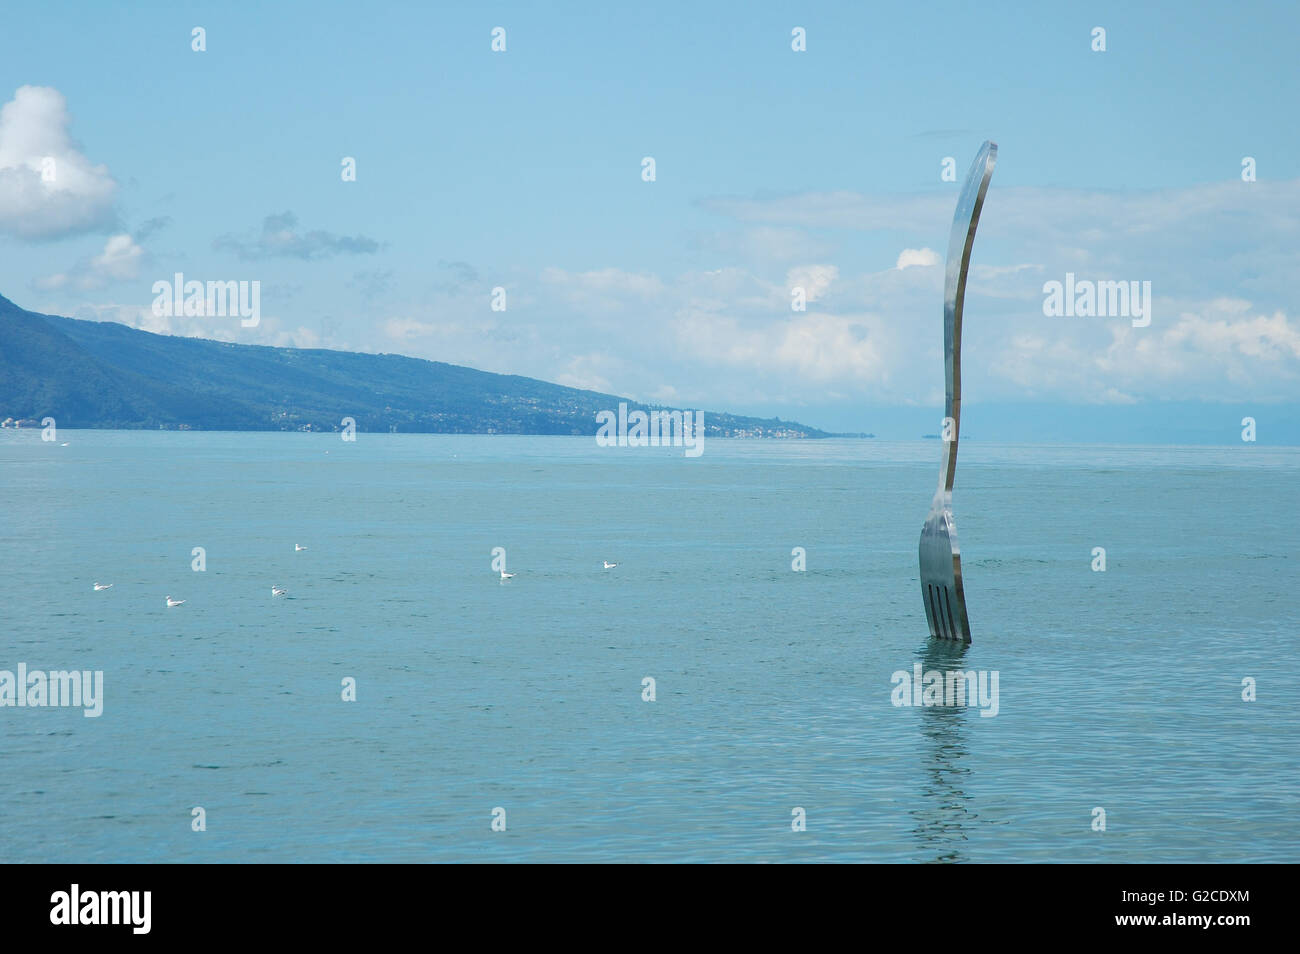 Vevey, Switzerland - August 16, 2014: Big fork in water in Vevey at Geneve lake in Switzerland Stock Photo